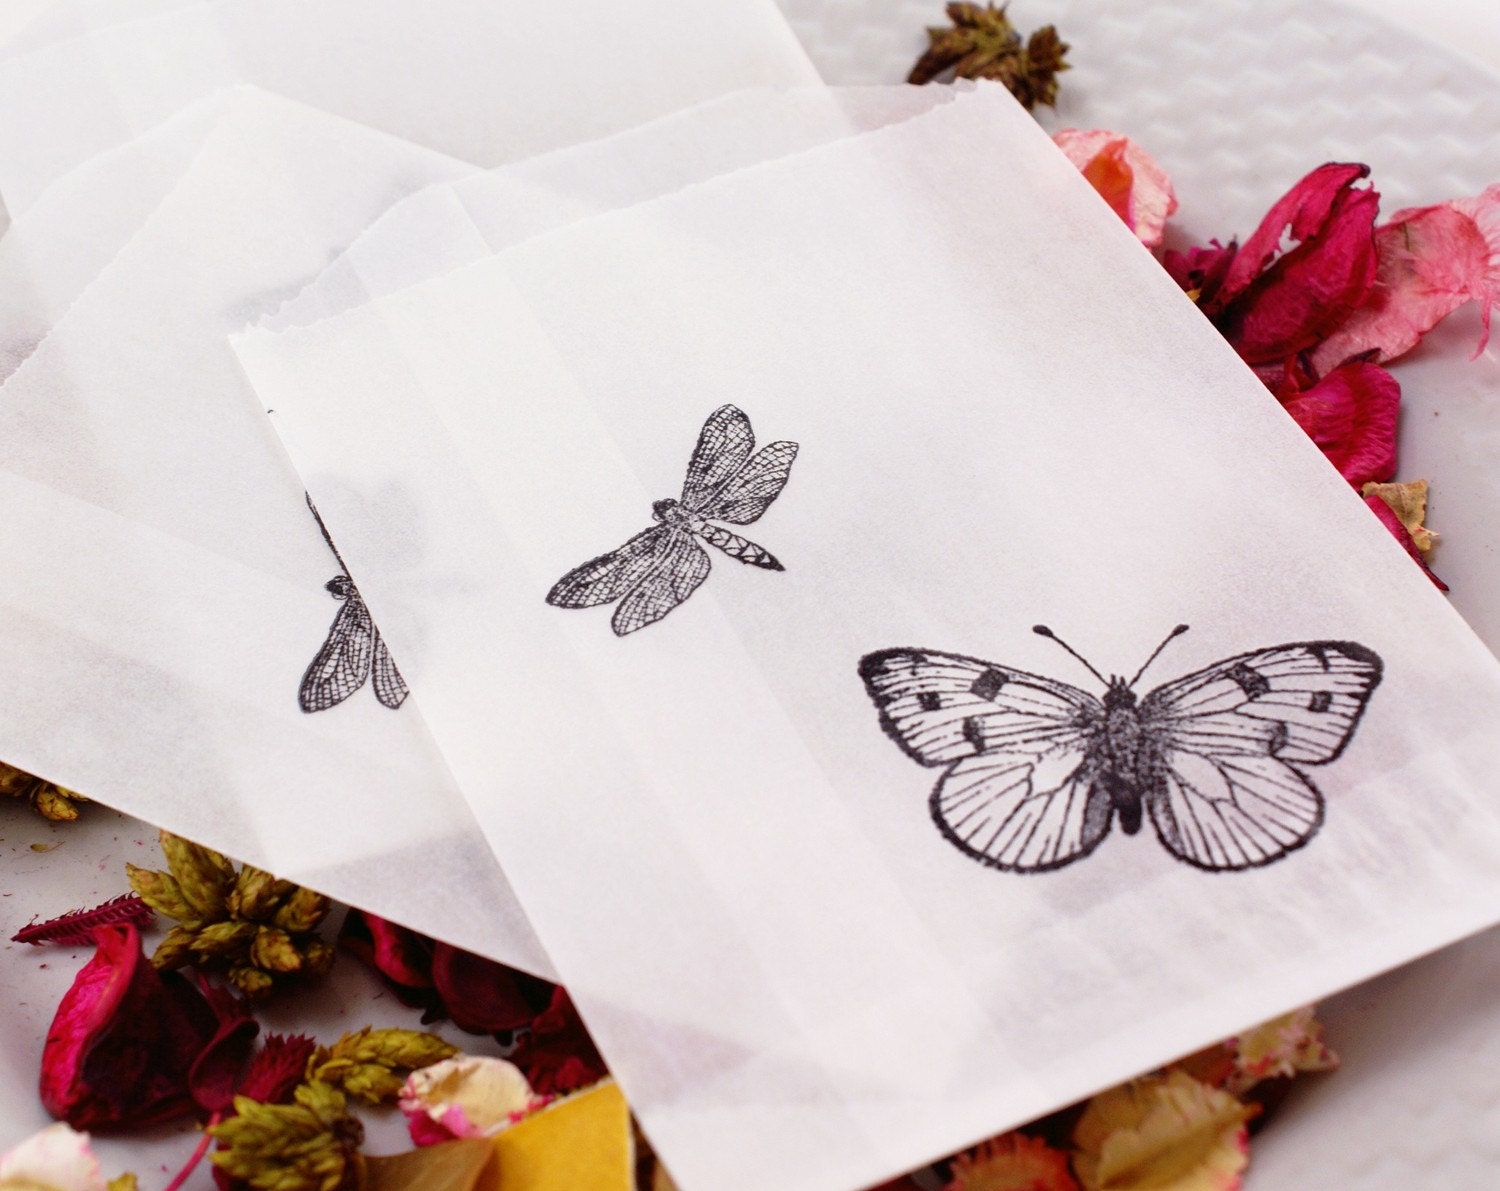 set of 100 BuTTERFLY & DRAGONFLY Hand Stamped Semi-transparent FOOD SAFE Wax Paper Glassine Bags - 3.75 x 5